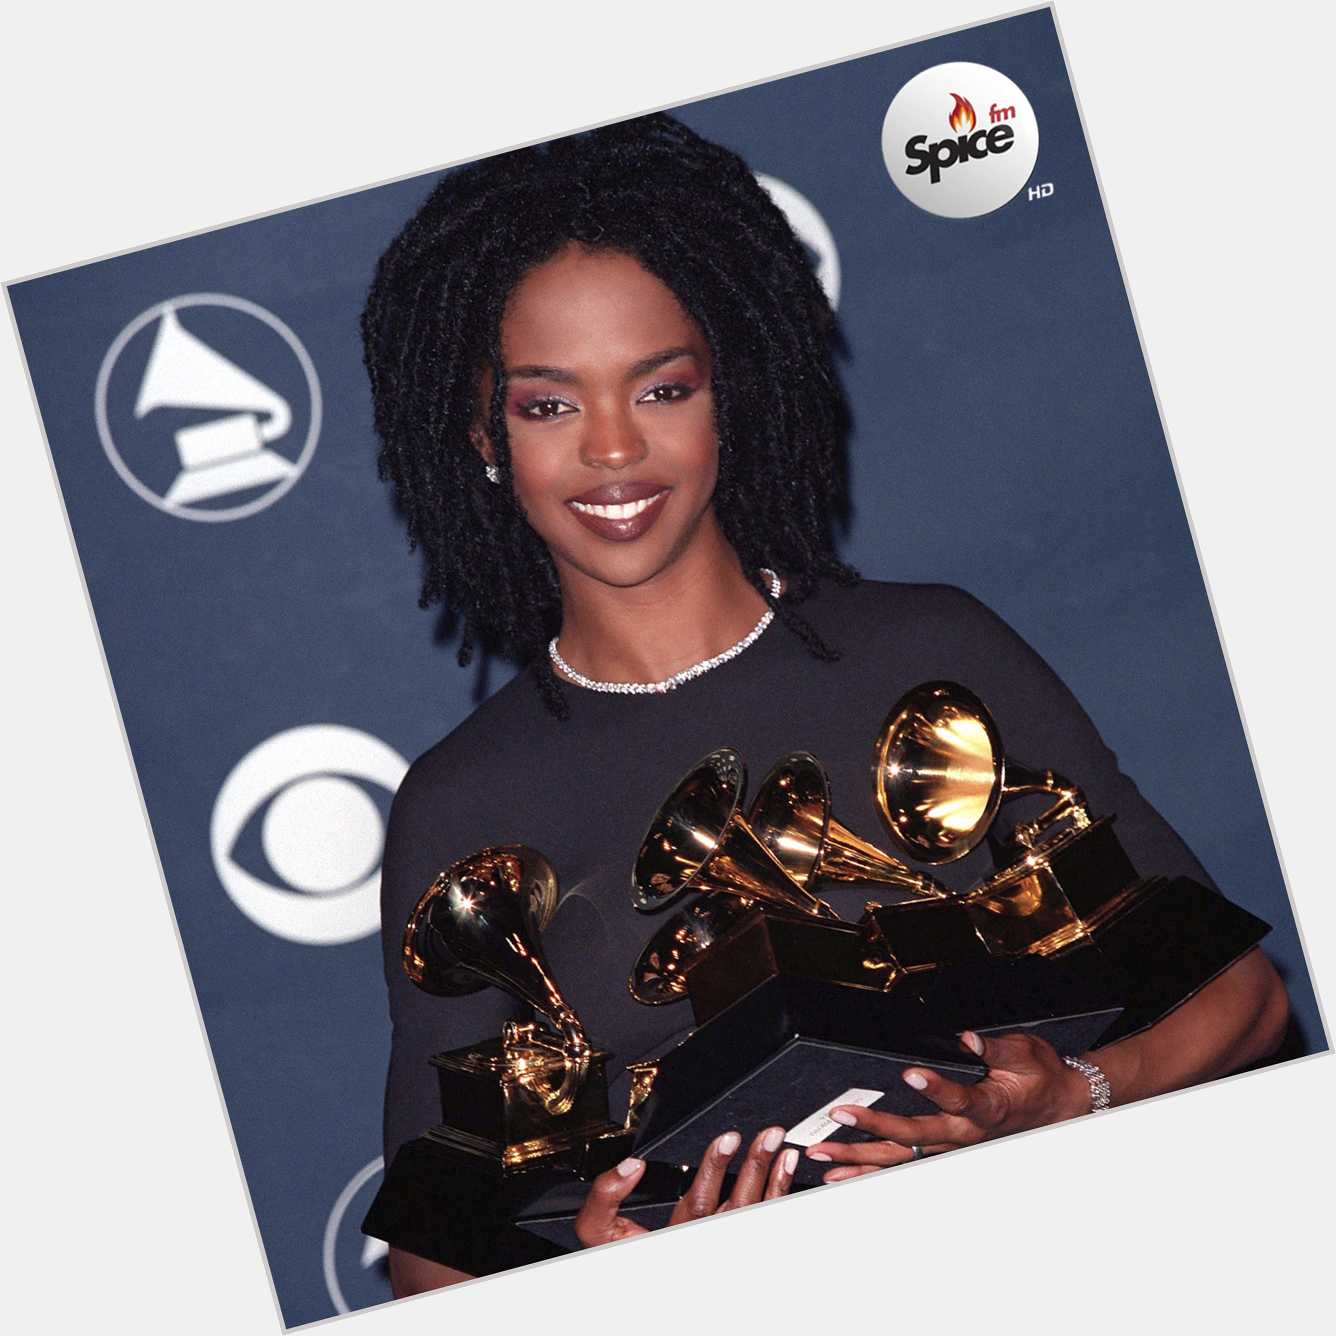 Happy birthday award-winning American singer, songwriter and rapper Lauryn Hill!  with 